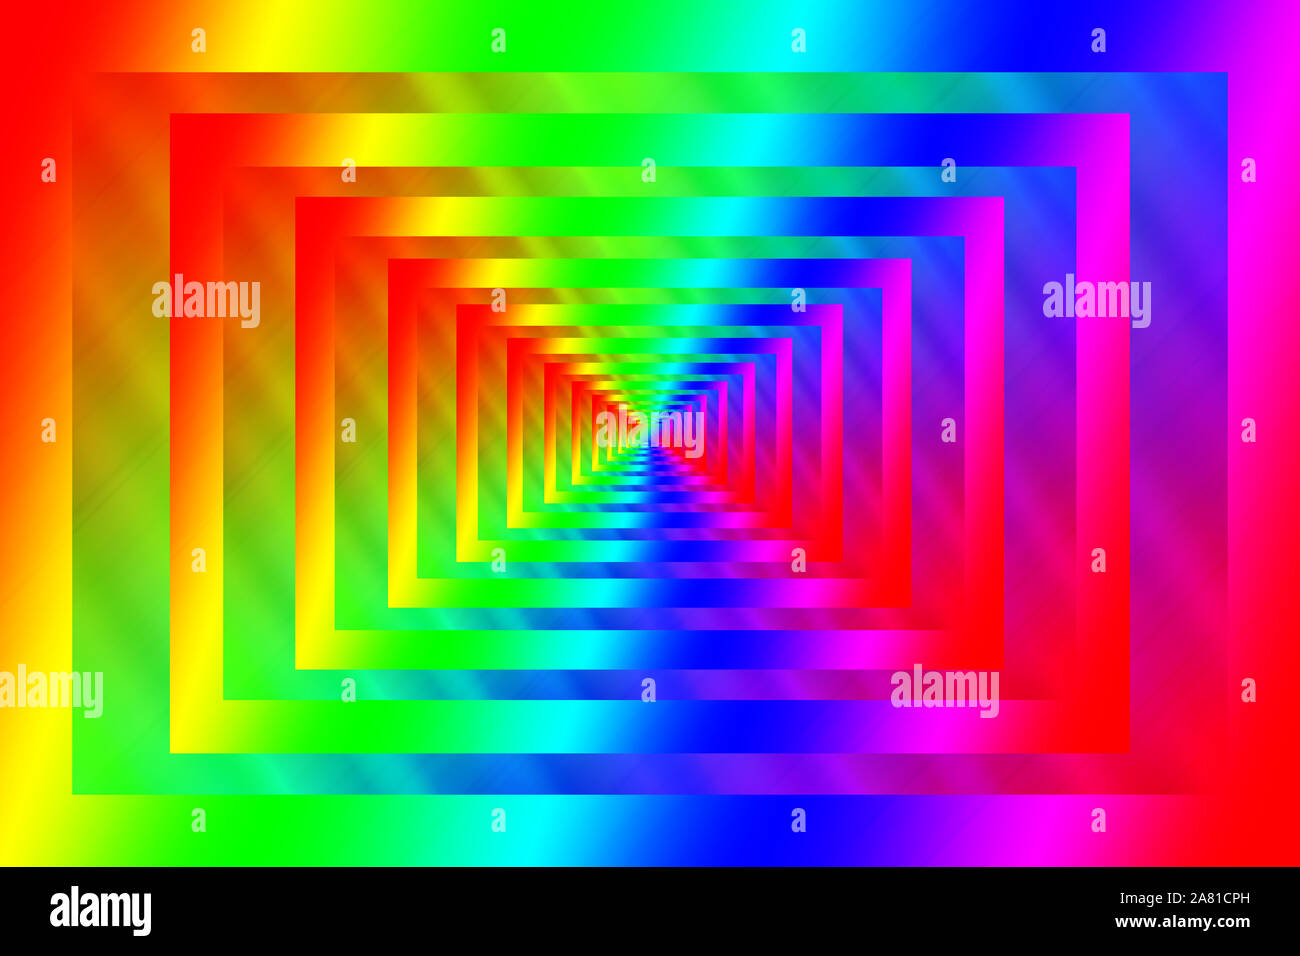 An abstract rainbow colored background image Stock Photo - Alamy